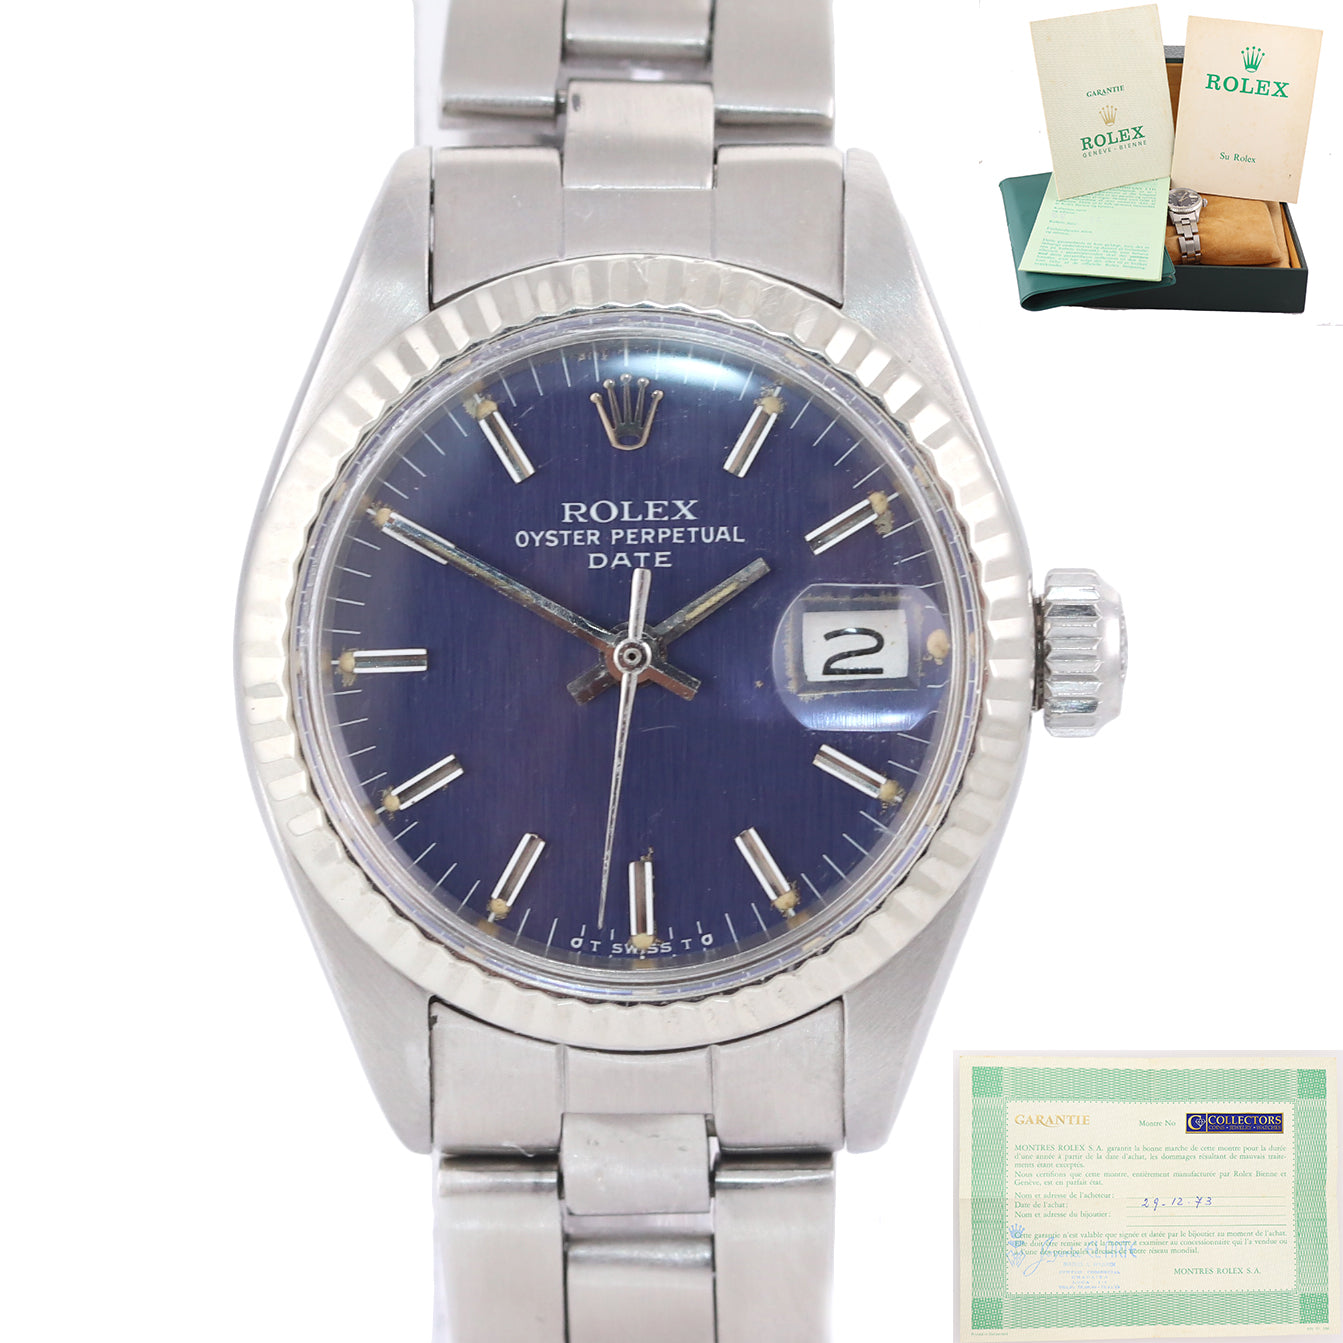 Ladies Rolex DateJust 26mm 6917 Stainless Steel Blue Dial Sigma Oyster Watch